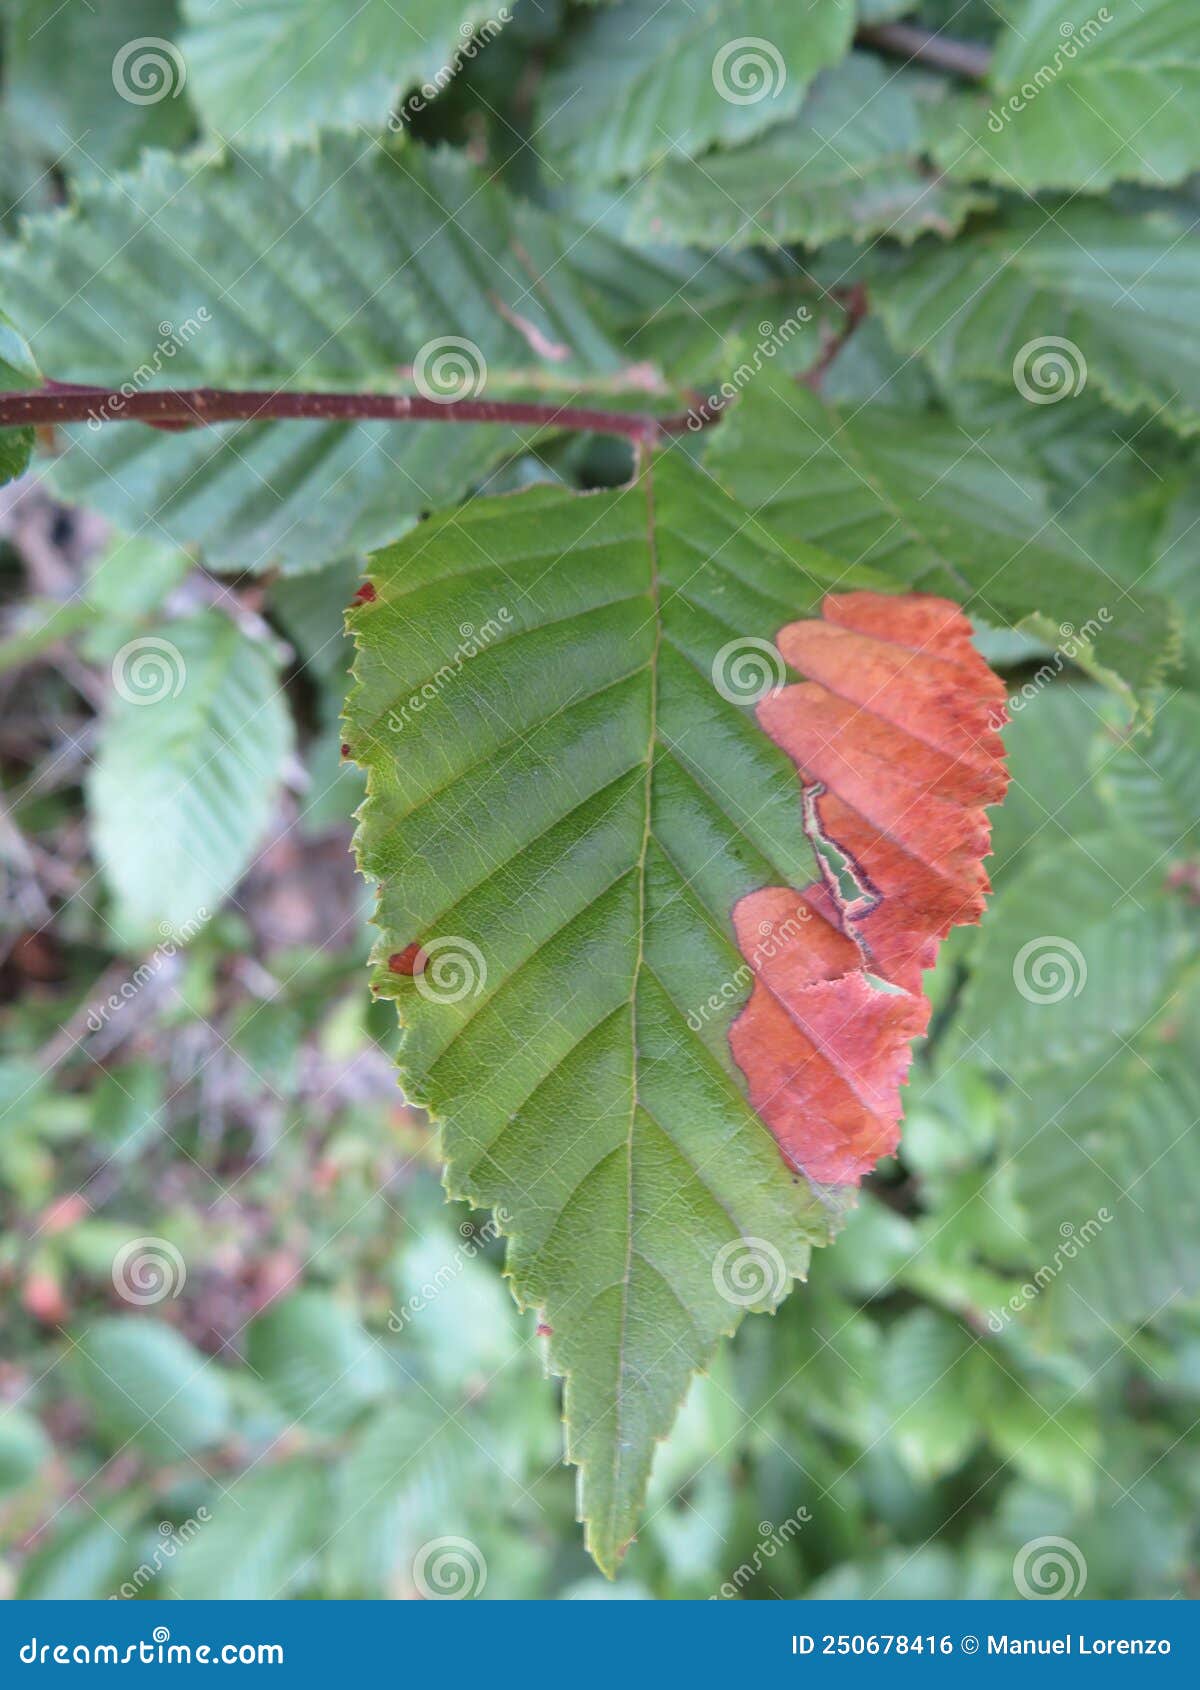 natural leaf damaged by a disease or drought pest